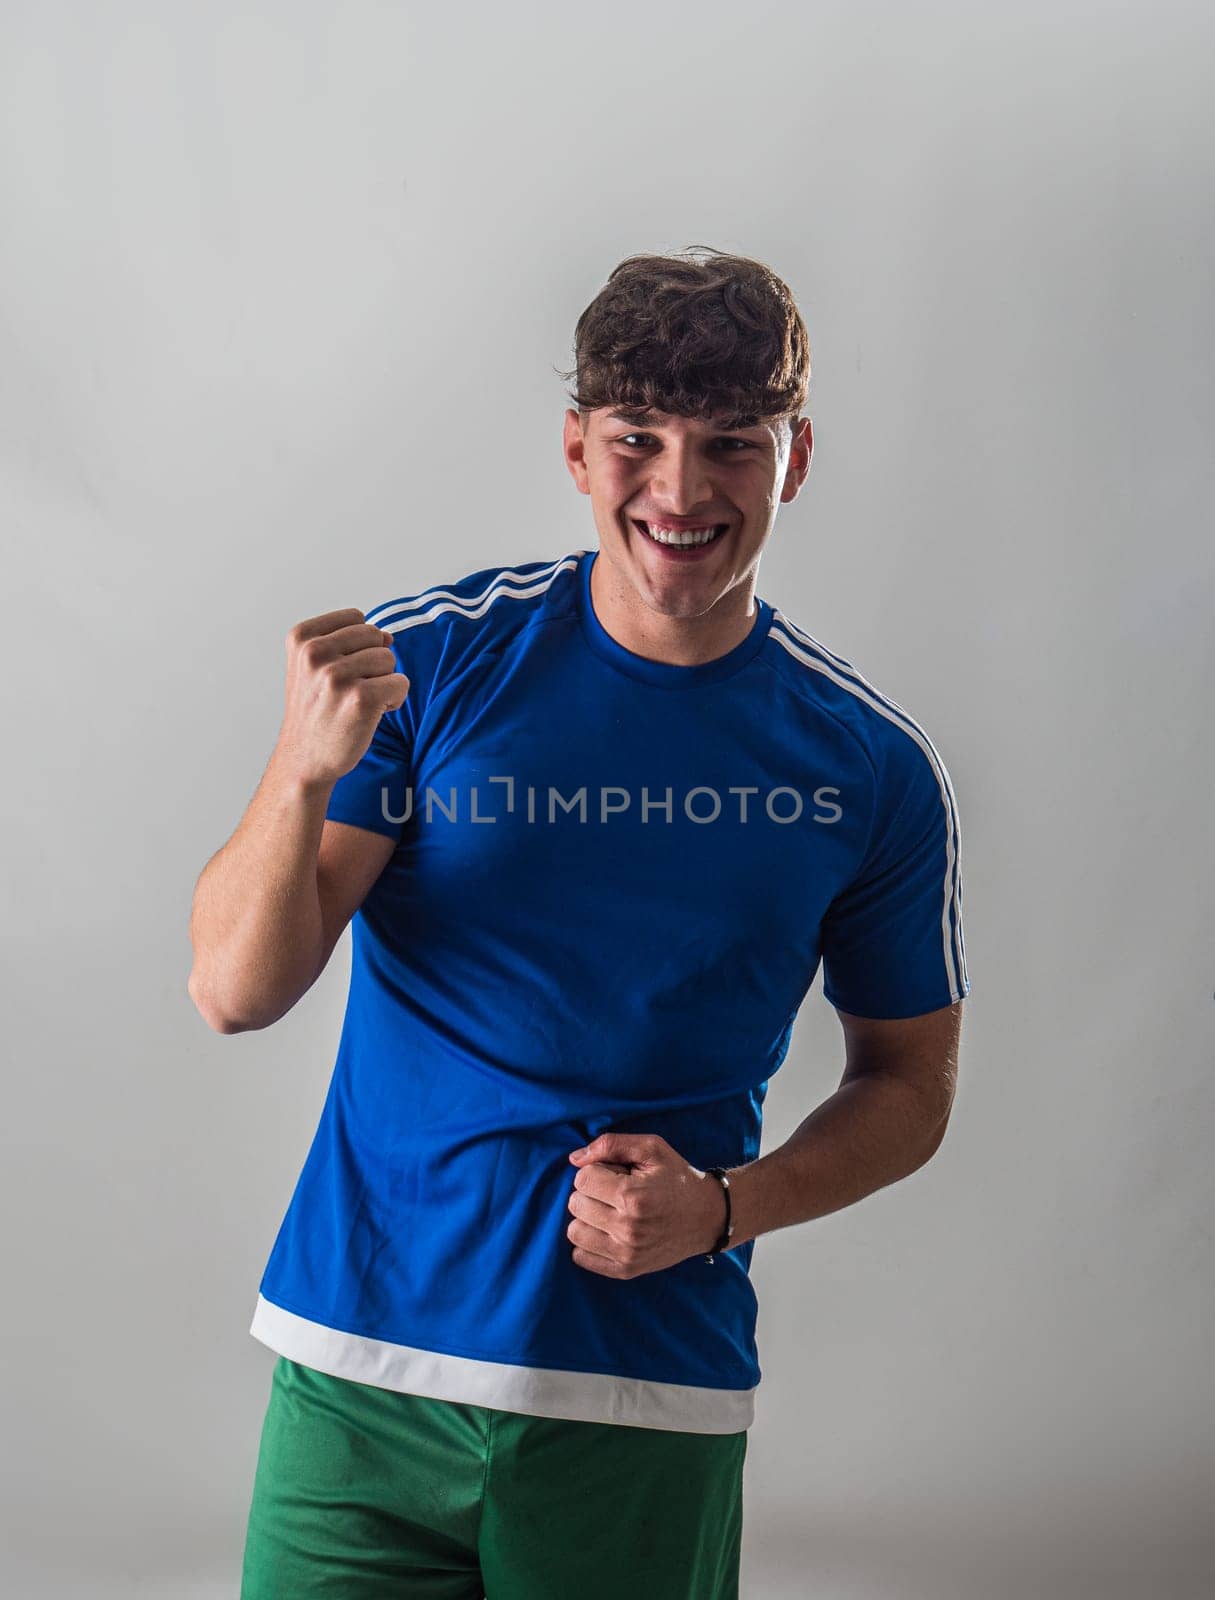 A man in a blue shirt and green shorts by artofphoto